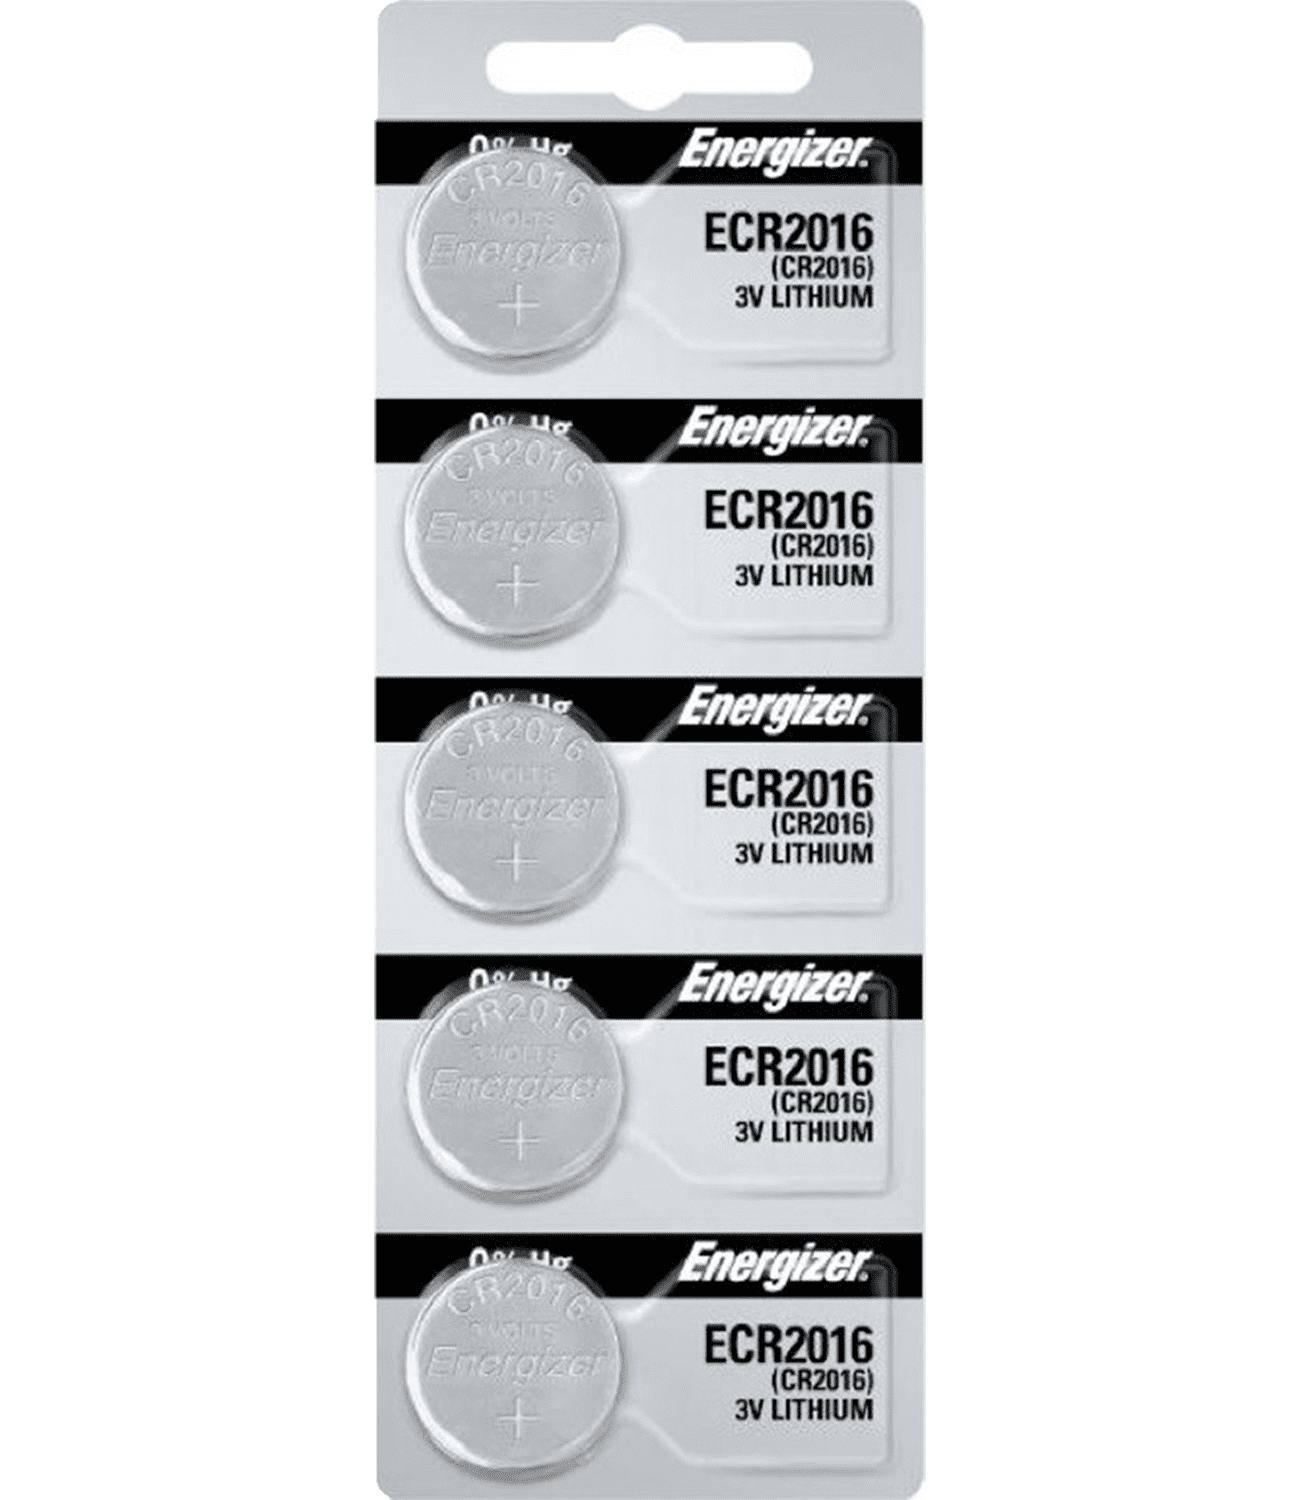 Energizer Cr2016 3V Lithium Coin Cell Battery (5 Count)